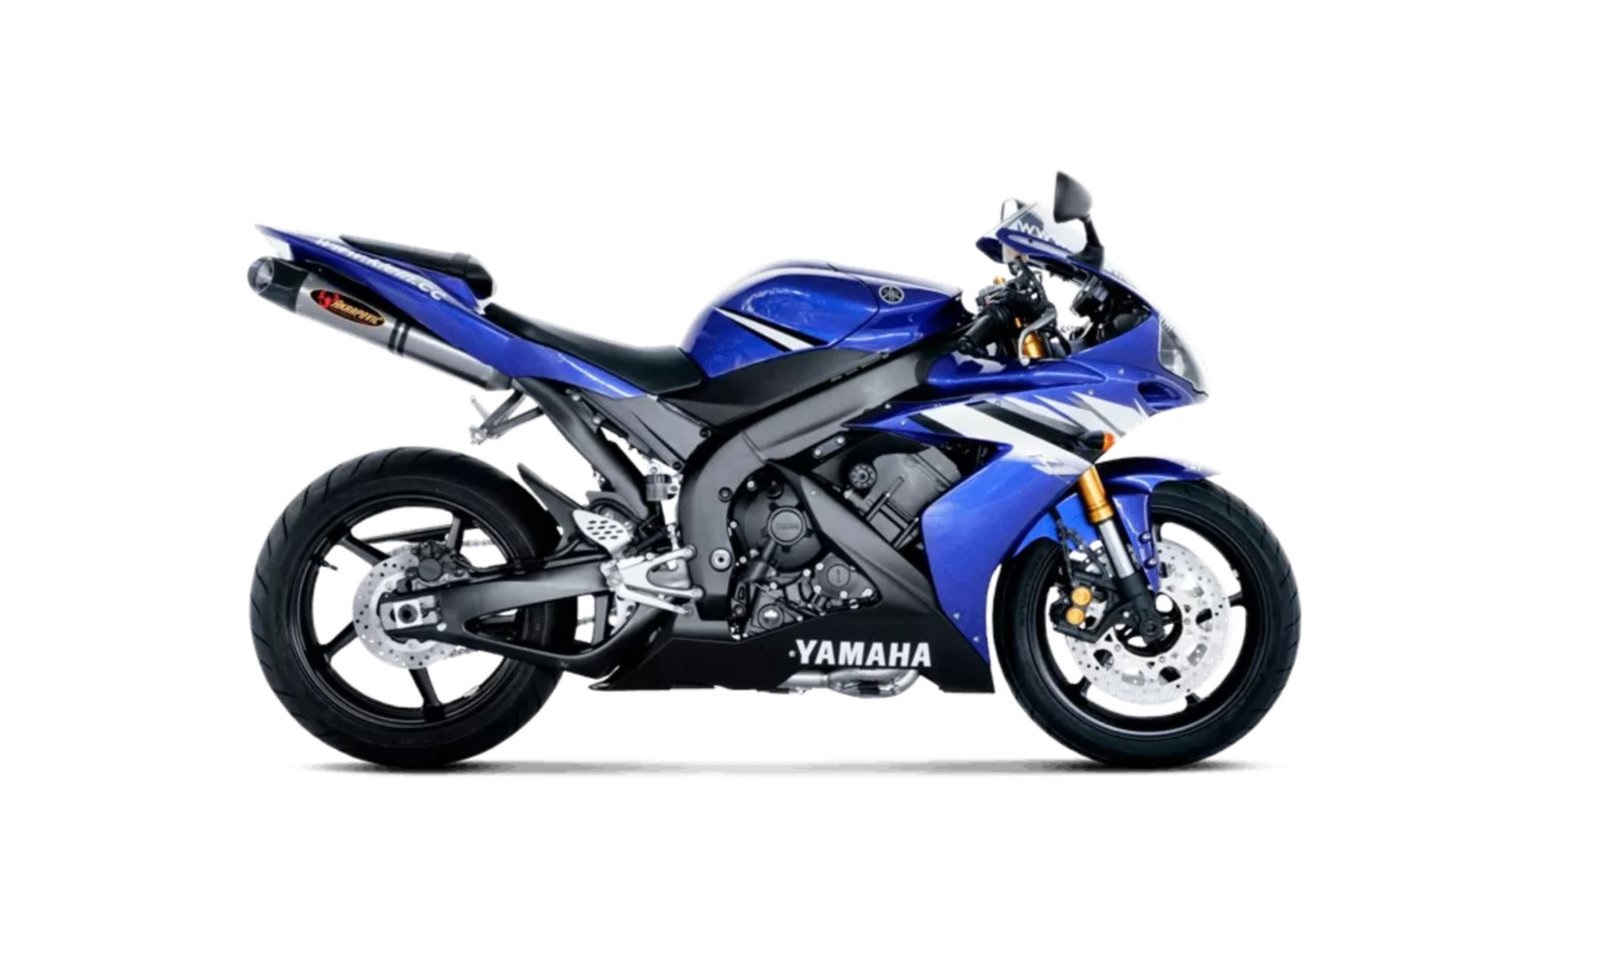 04-06 Yamaha YZF-R1 Top Speed & Acceleration -